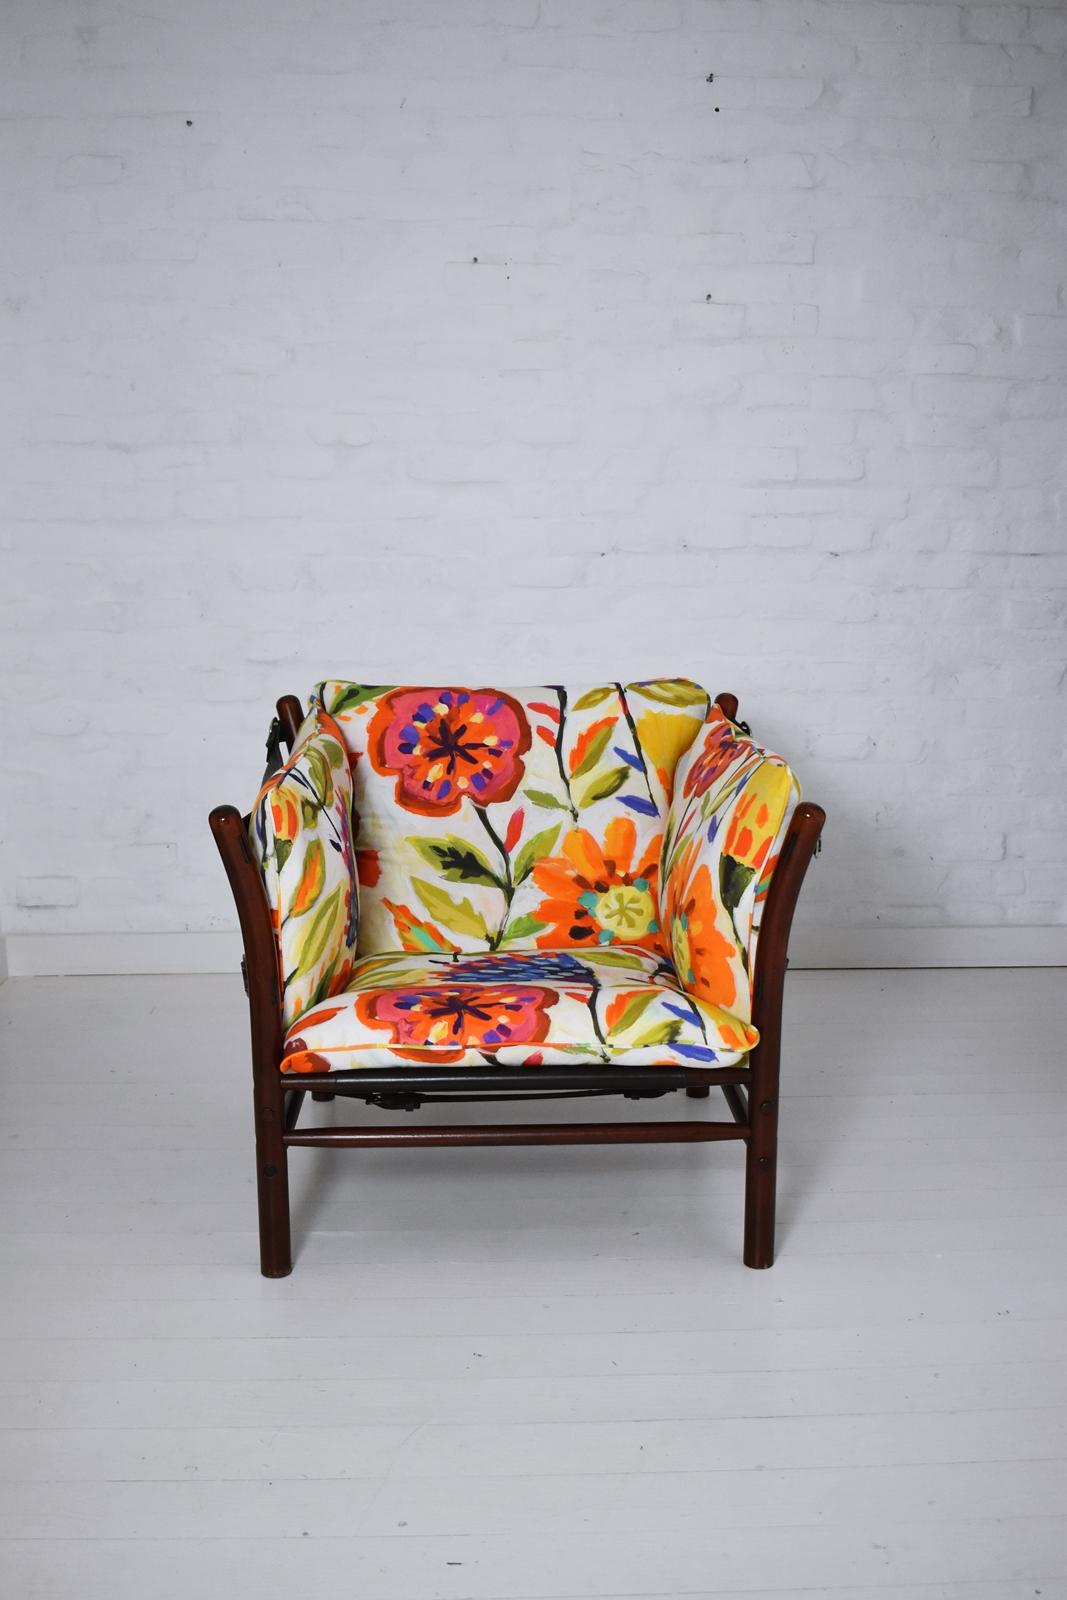 A 1960s 'Ilona' chair by Swedish designer Arne Norell.
Featuring stained beech and saddle leather with 4 loose cushions. Wear consistent with age and use.
Cushions recovered in Josef Frank style canvas fabric.